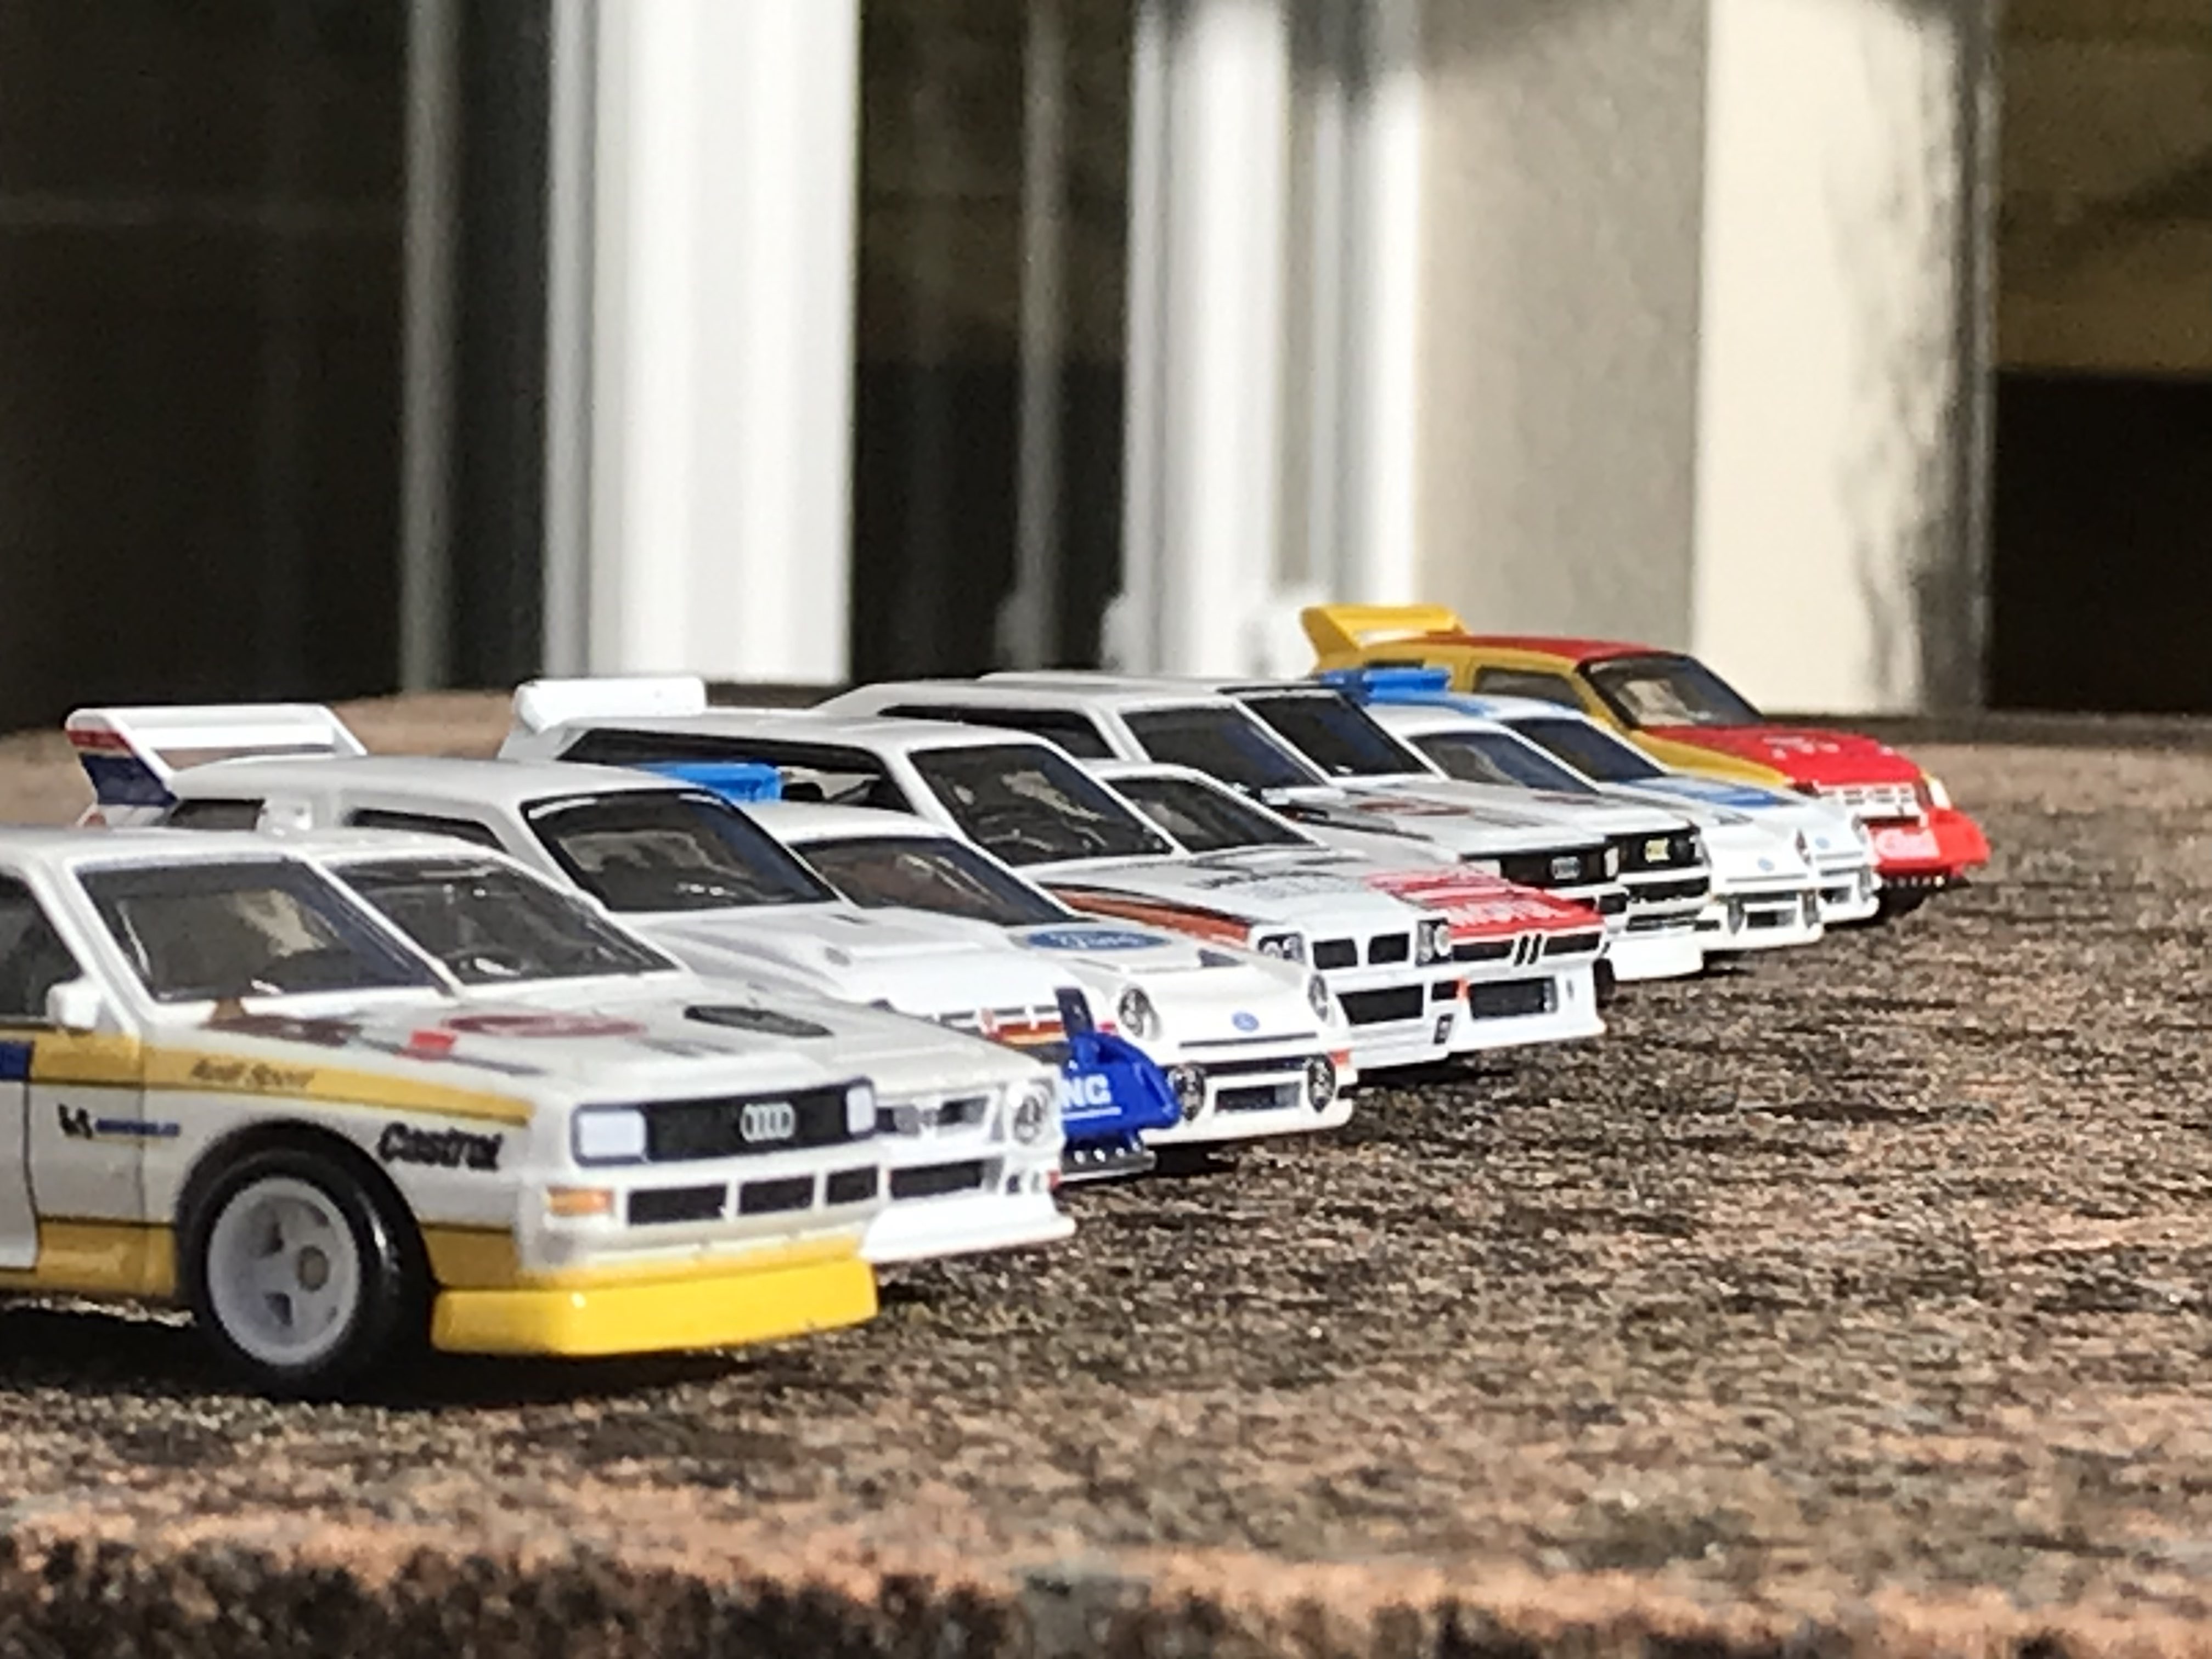 Various Hotwheel Group B Rally cars of various makes and models, lined up diagonally away from the camera. [Boards of Canada - Dayvan Cowboy]